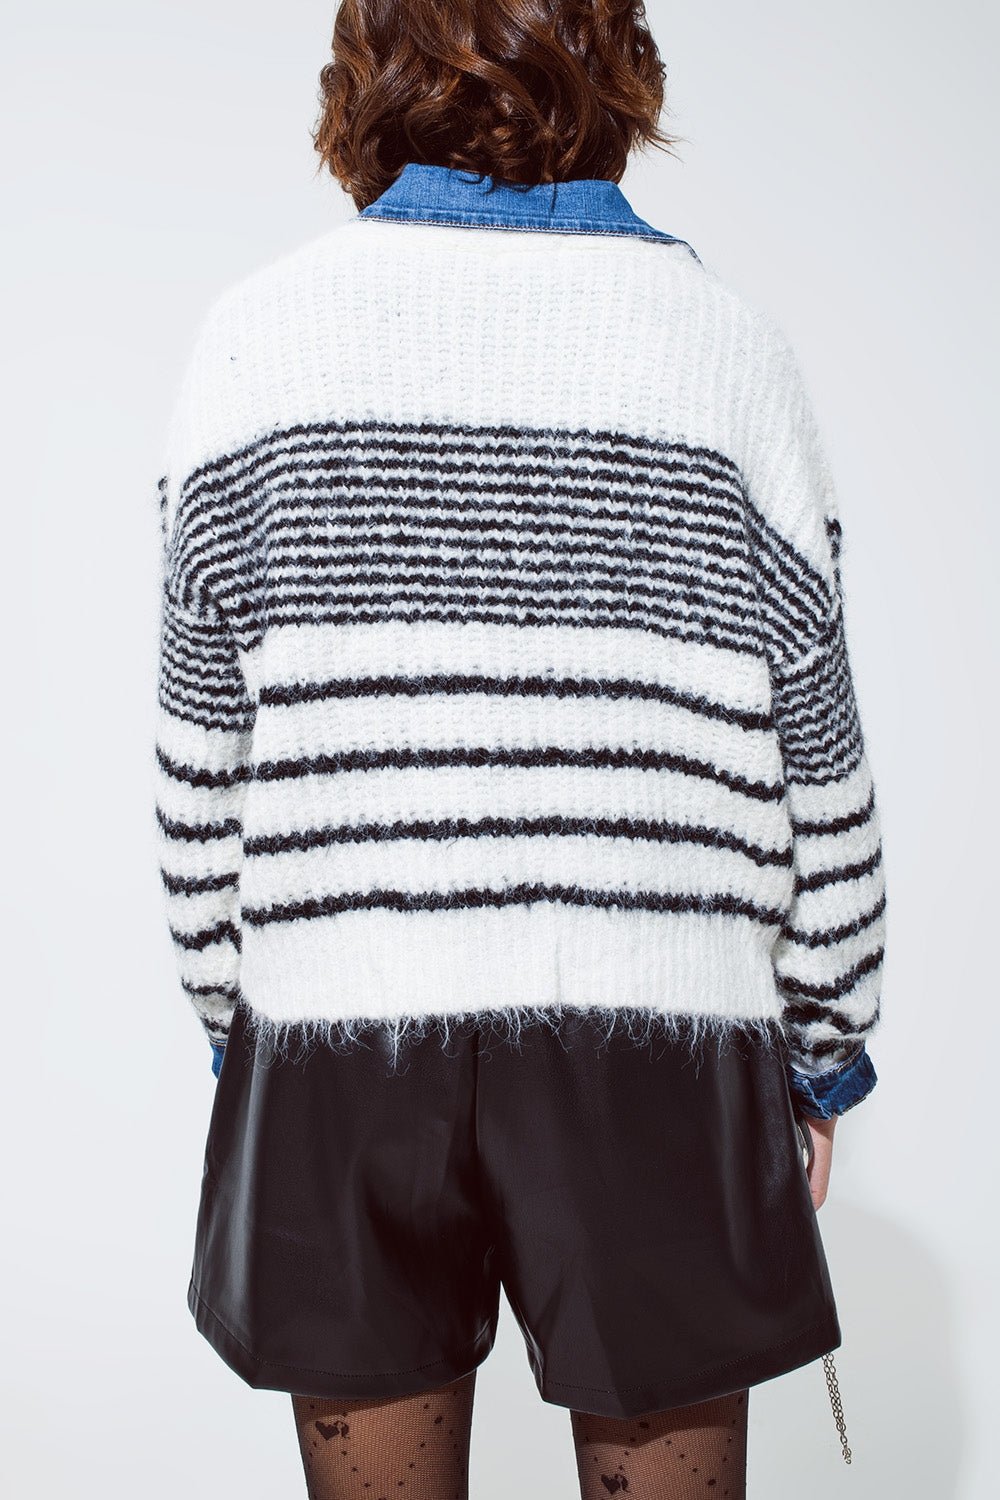 Soft and Fluffy White Cardigan With Black Stripes and Deep v Neck - Mack & Harvie